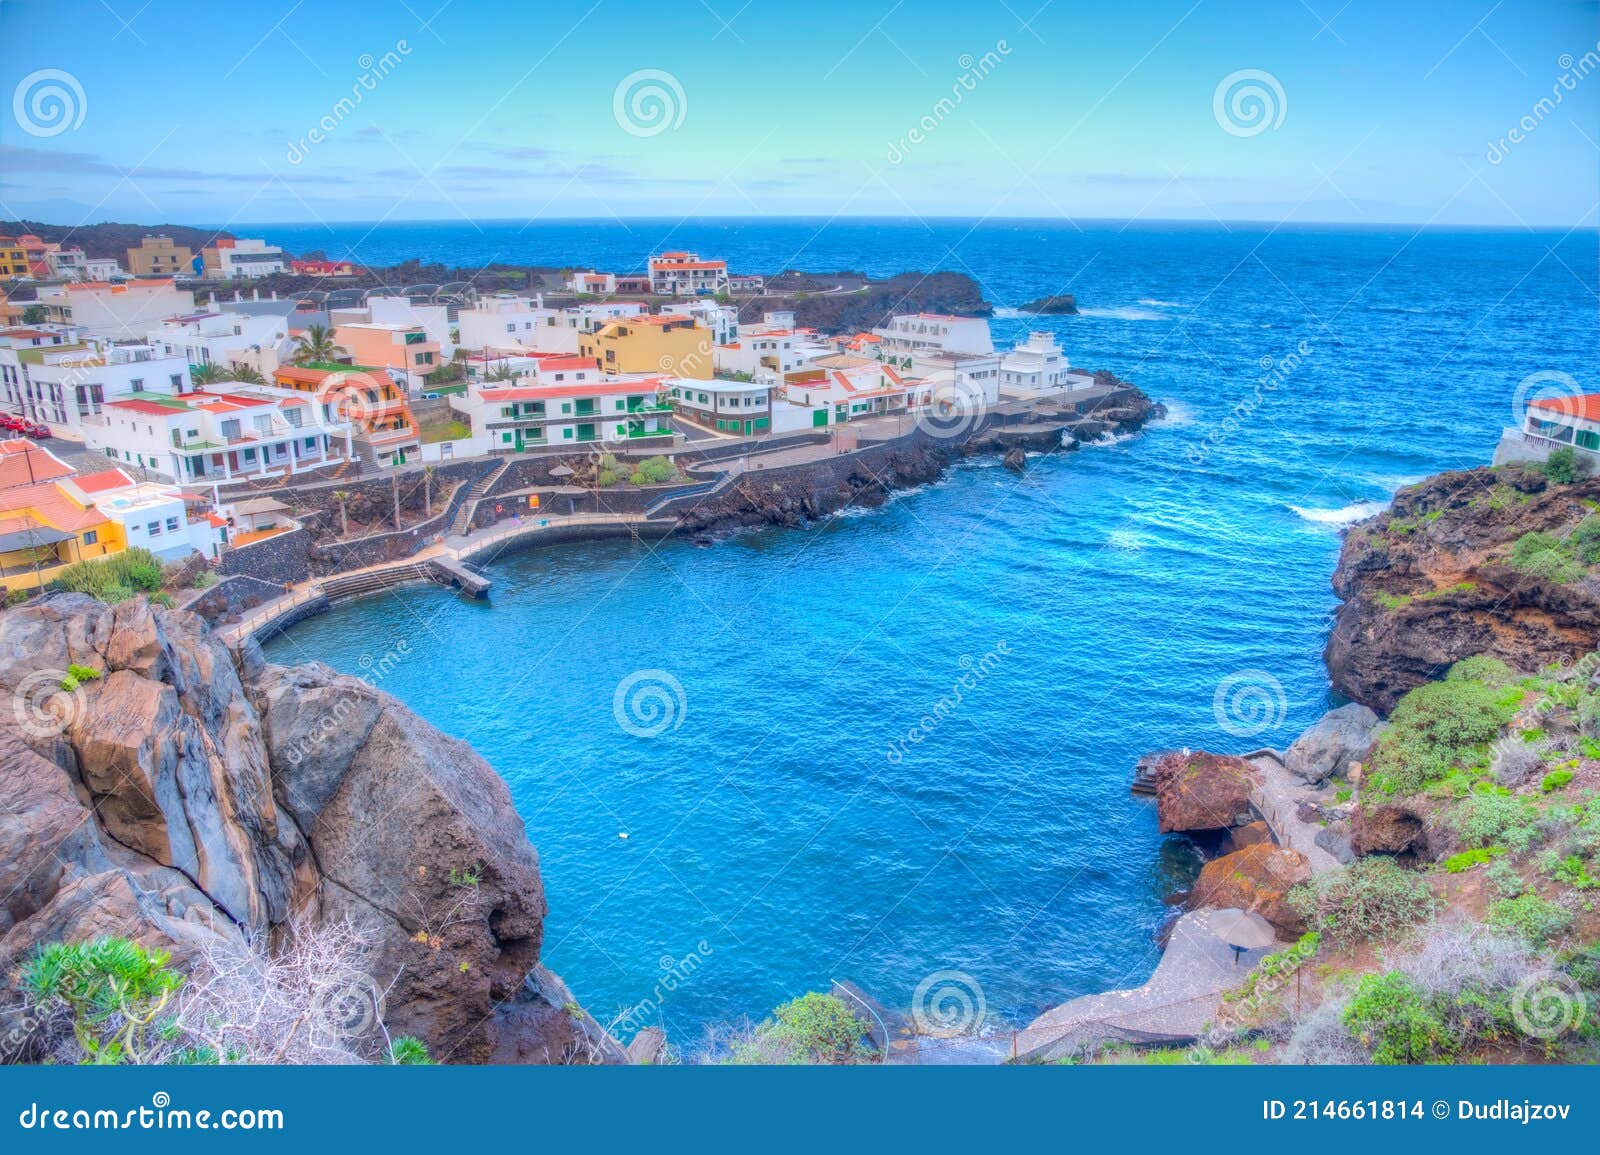 tamaduste village situated on shore of el hierro island at canary islands, spain